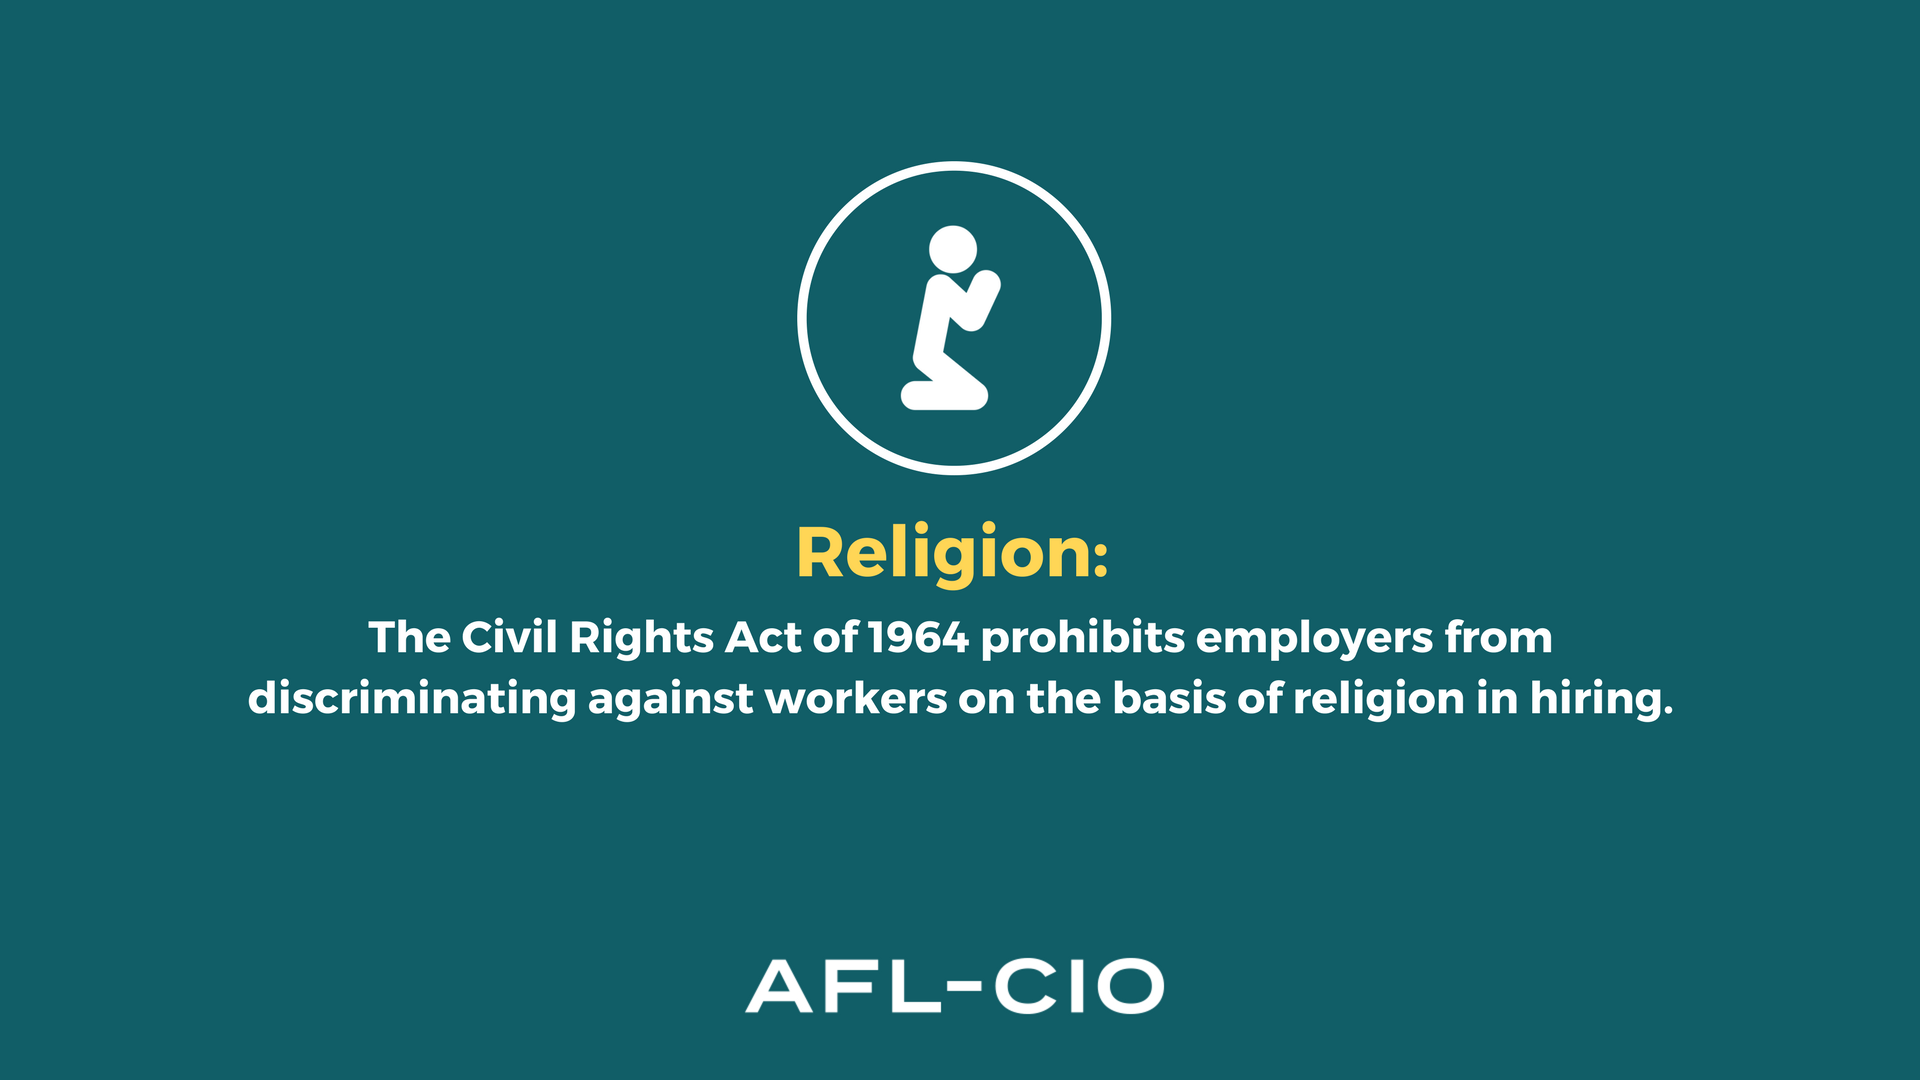 Religion: The Civil Rights Act of 1964 prohibits employers from discriminating against workers on the basis of religion in hiring.